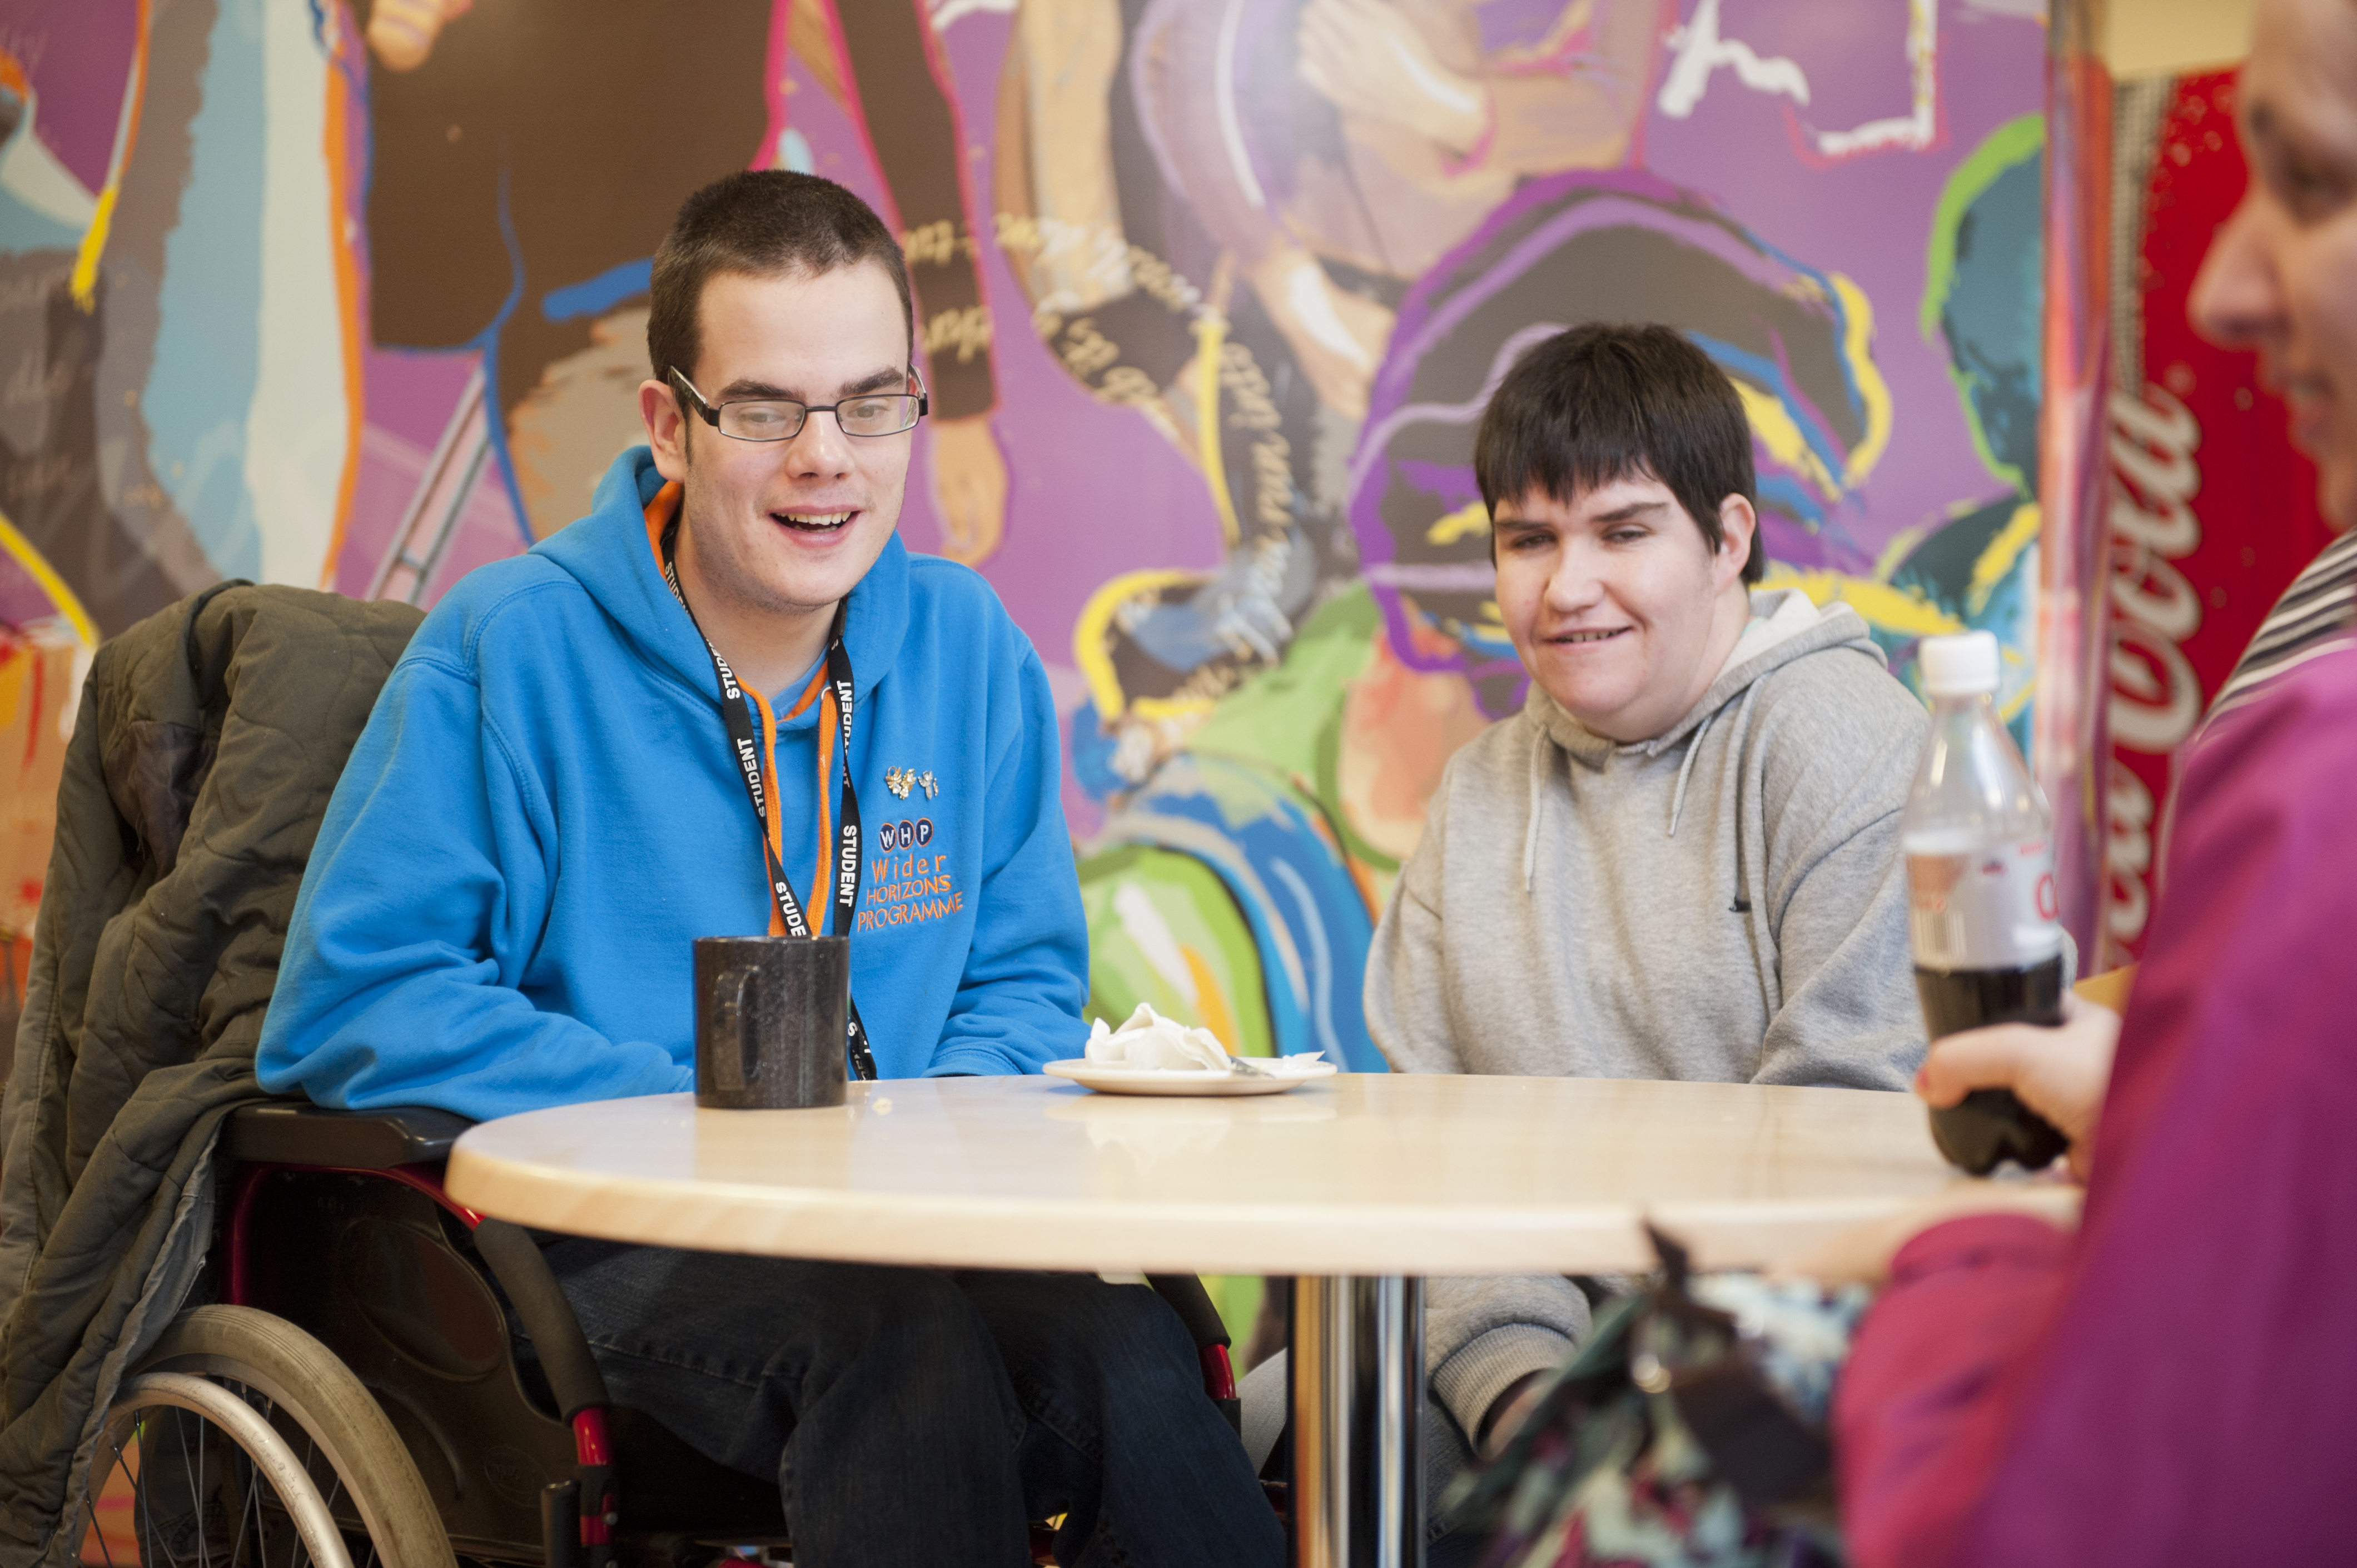 Two South West College students sitting at a table, one is using a wheelchair